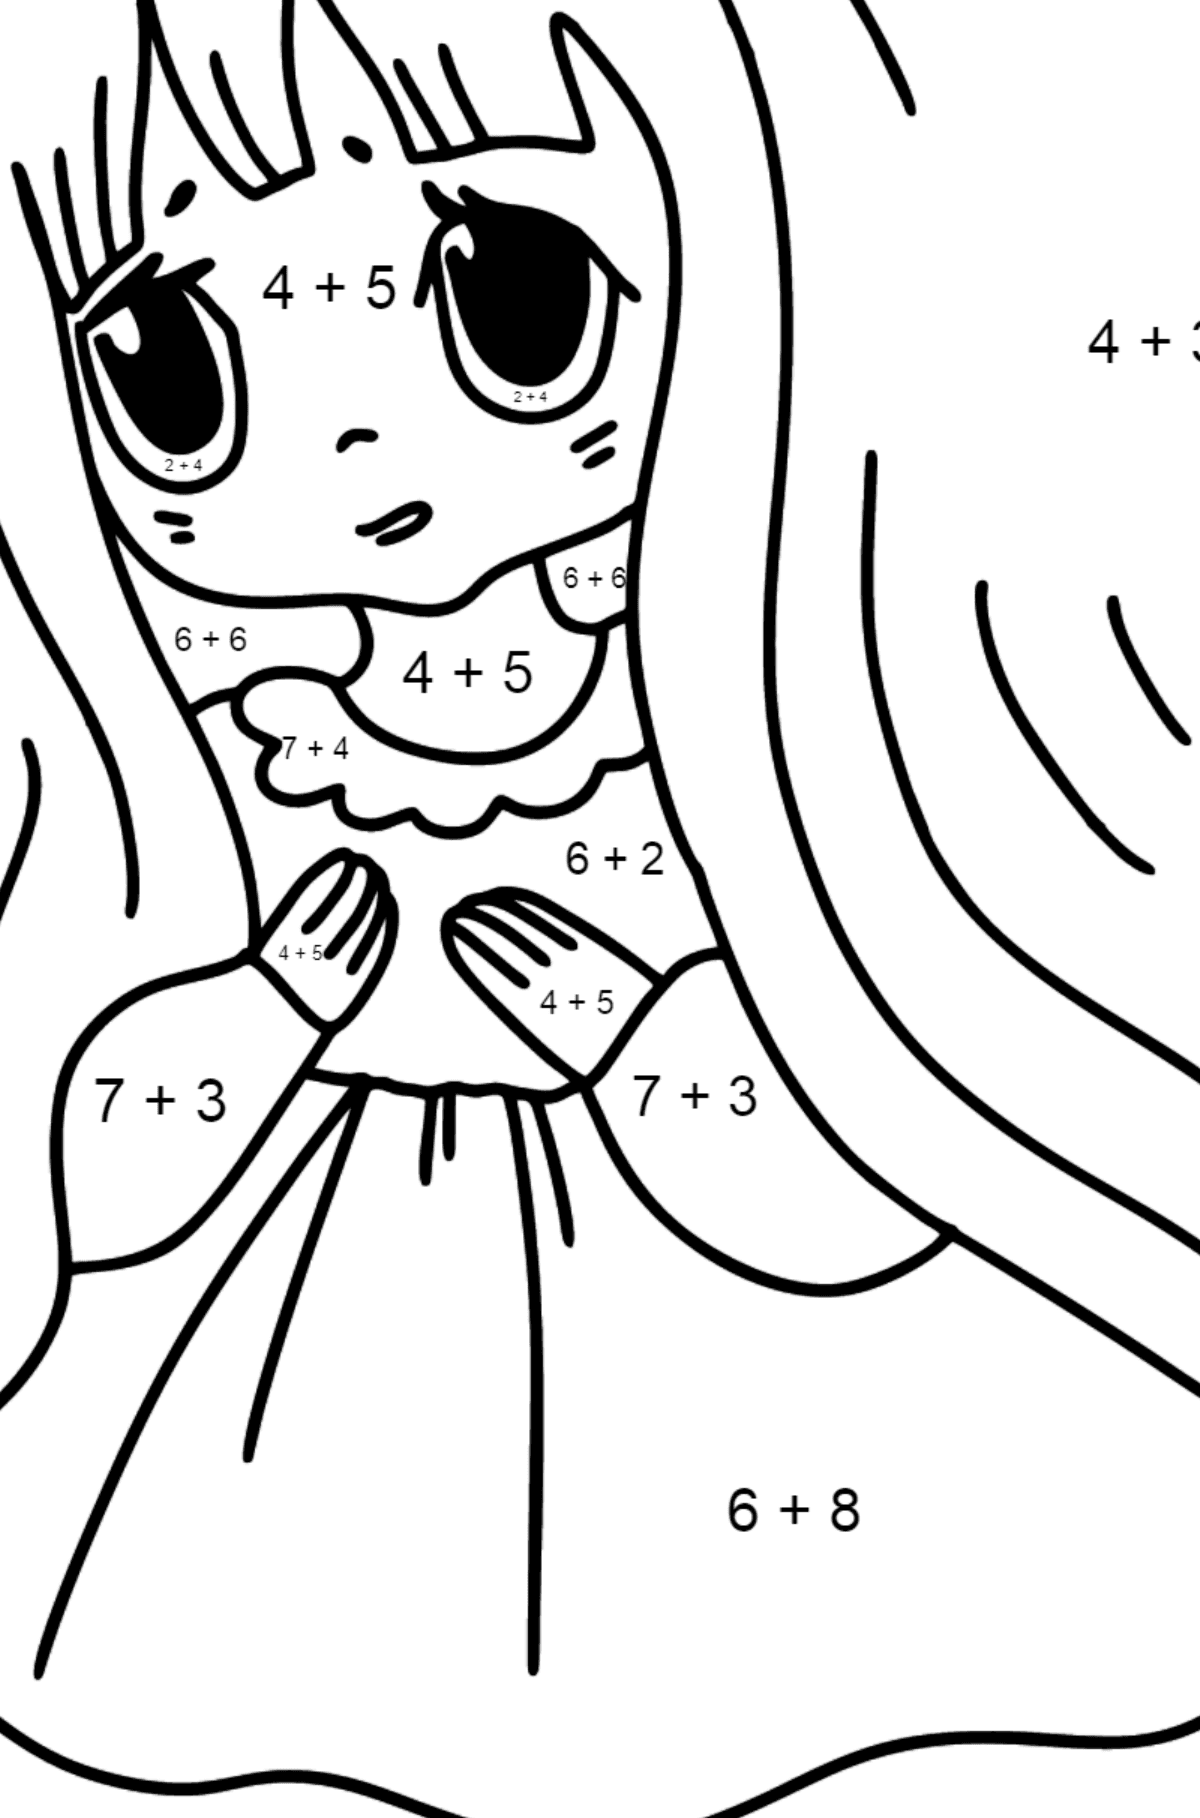 Anime Sad Girl Coloring Pages - Math Coloring - Addition for Kids